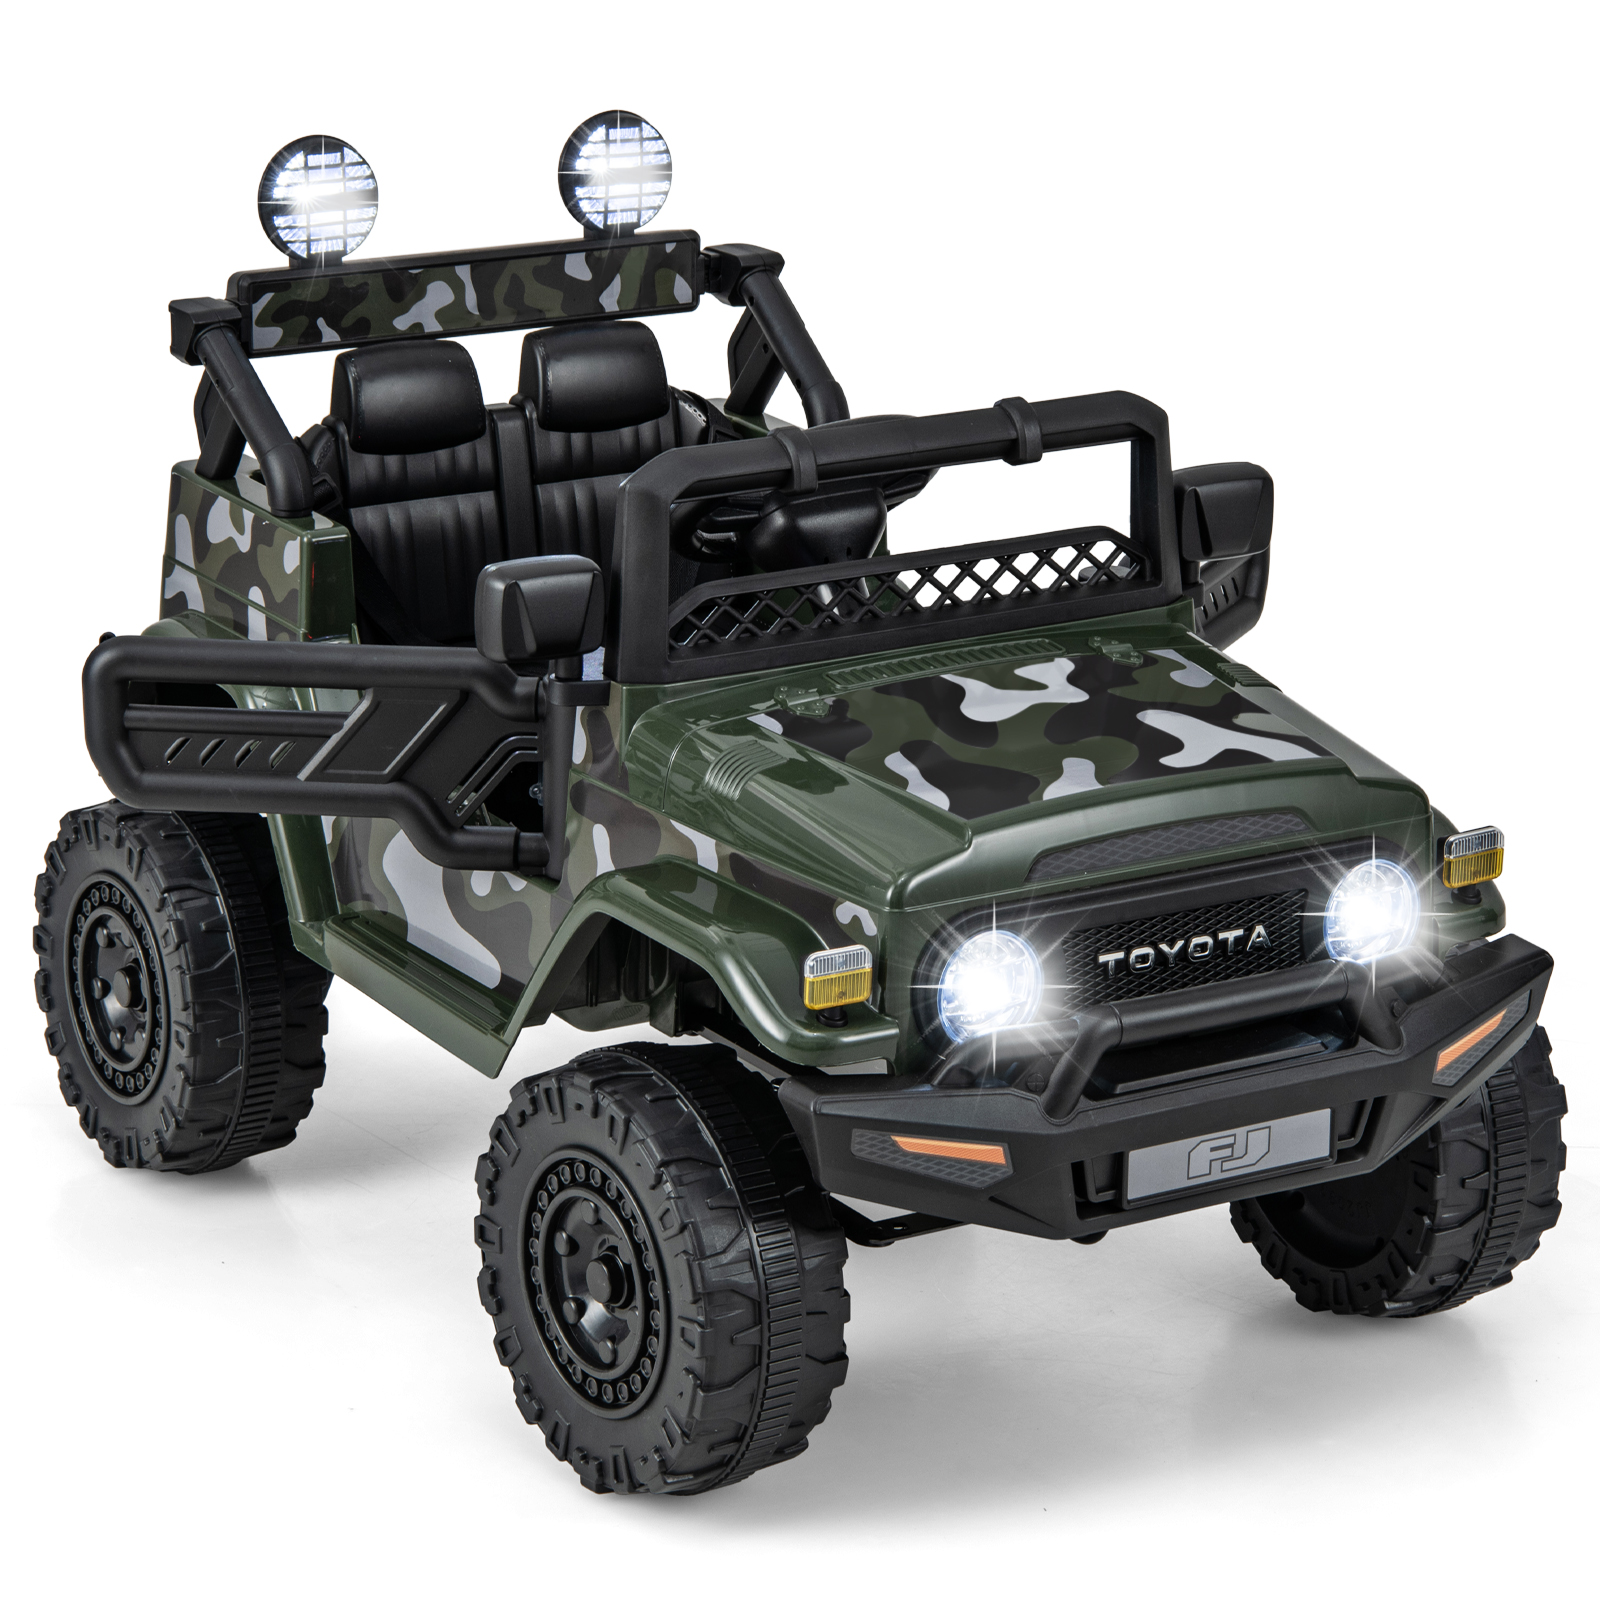 12V 7Ah Licensed Toyota FJ Cruiser Electric Car with Remote Control-Camouflage